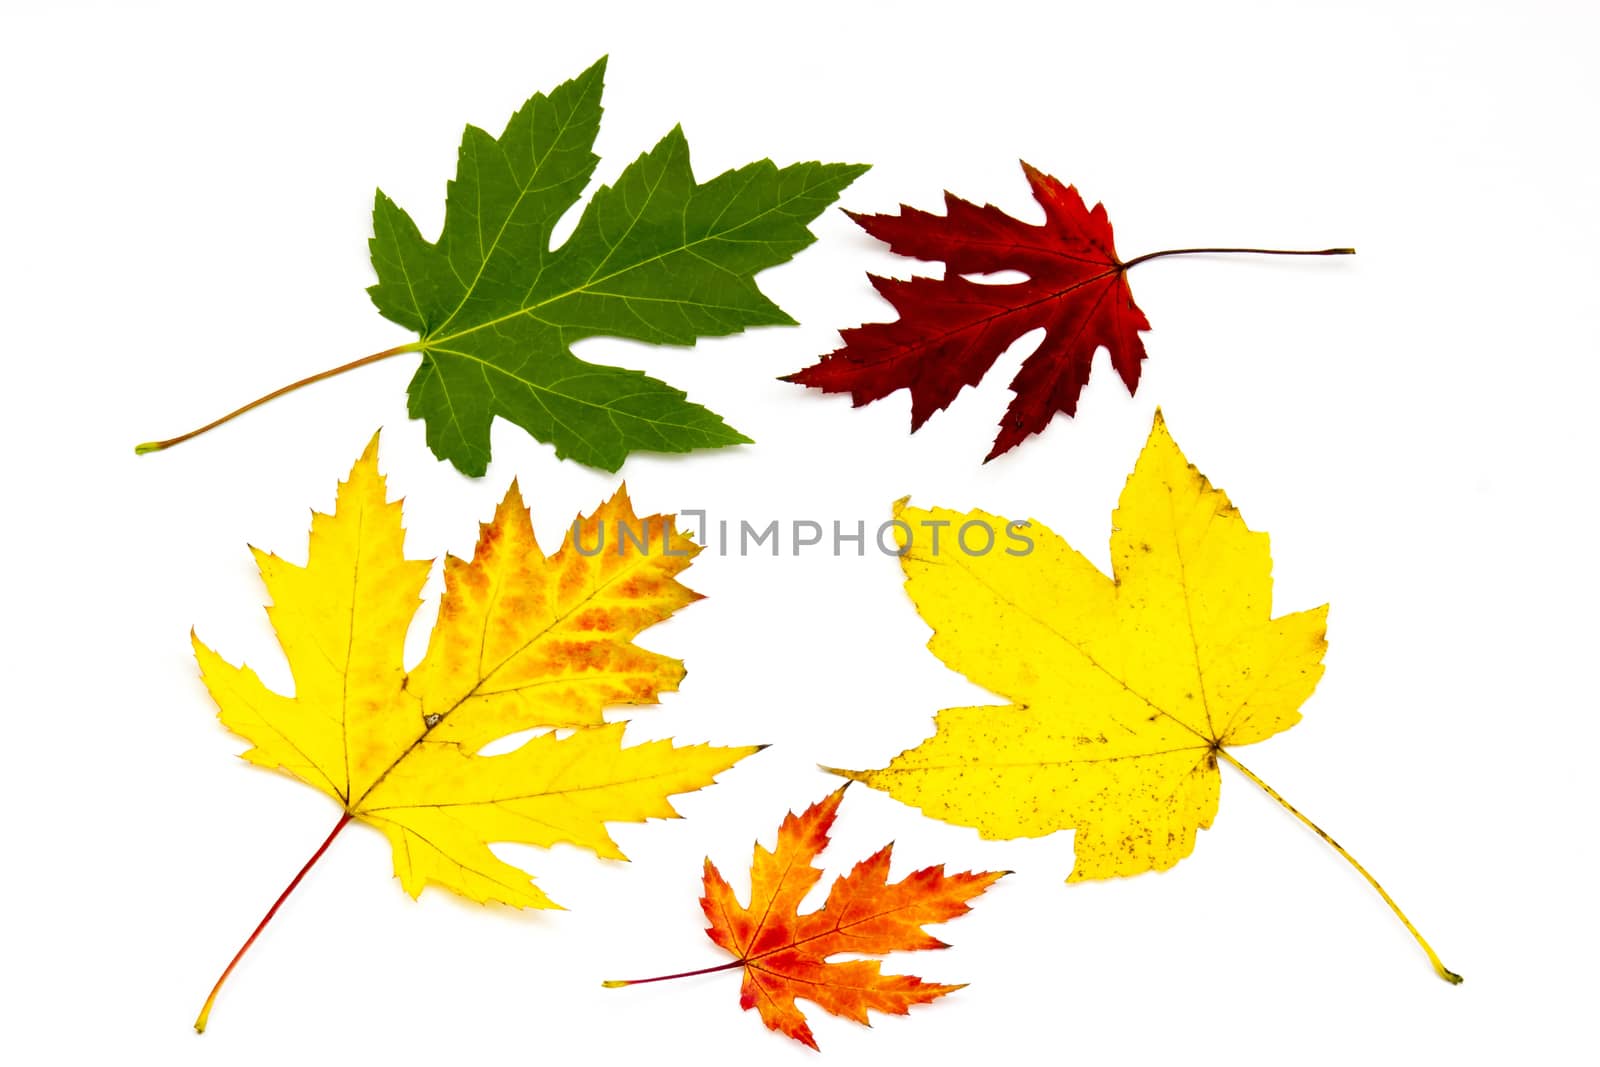 collection of colorful autumn leaves isolated on white backgroun by miradrozdowski